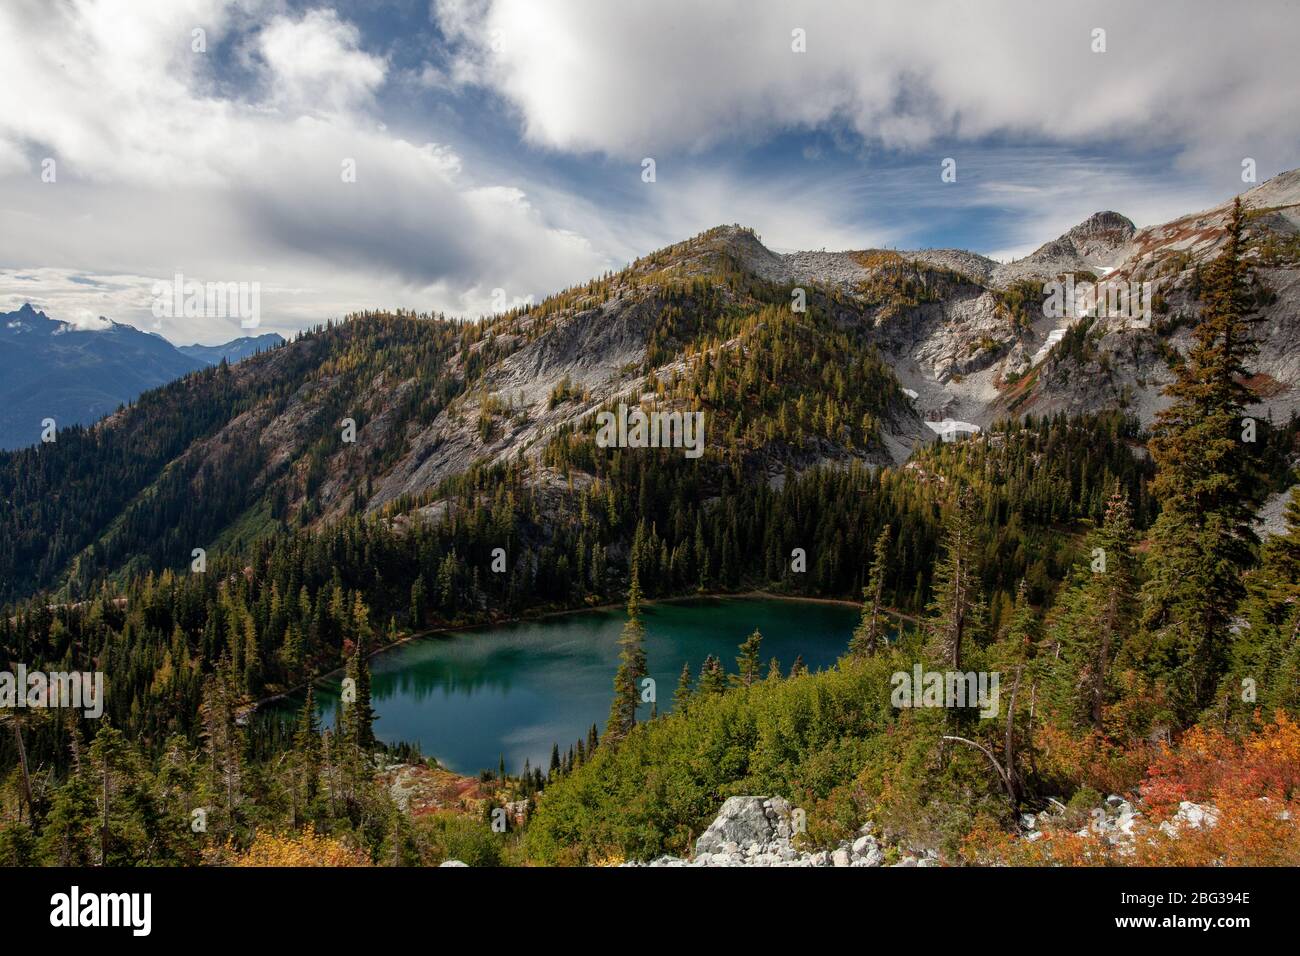 A mountain lake in a basin is visible from the side of a mountain, surrounded by Western larch trees, under a blue sky with white and light grey cloud Stock Photo